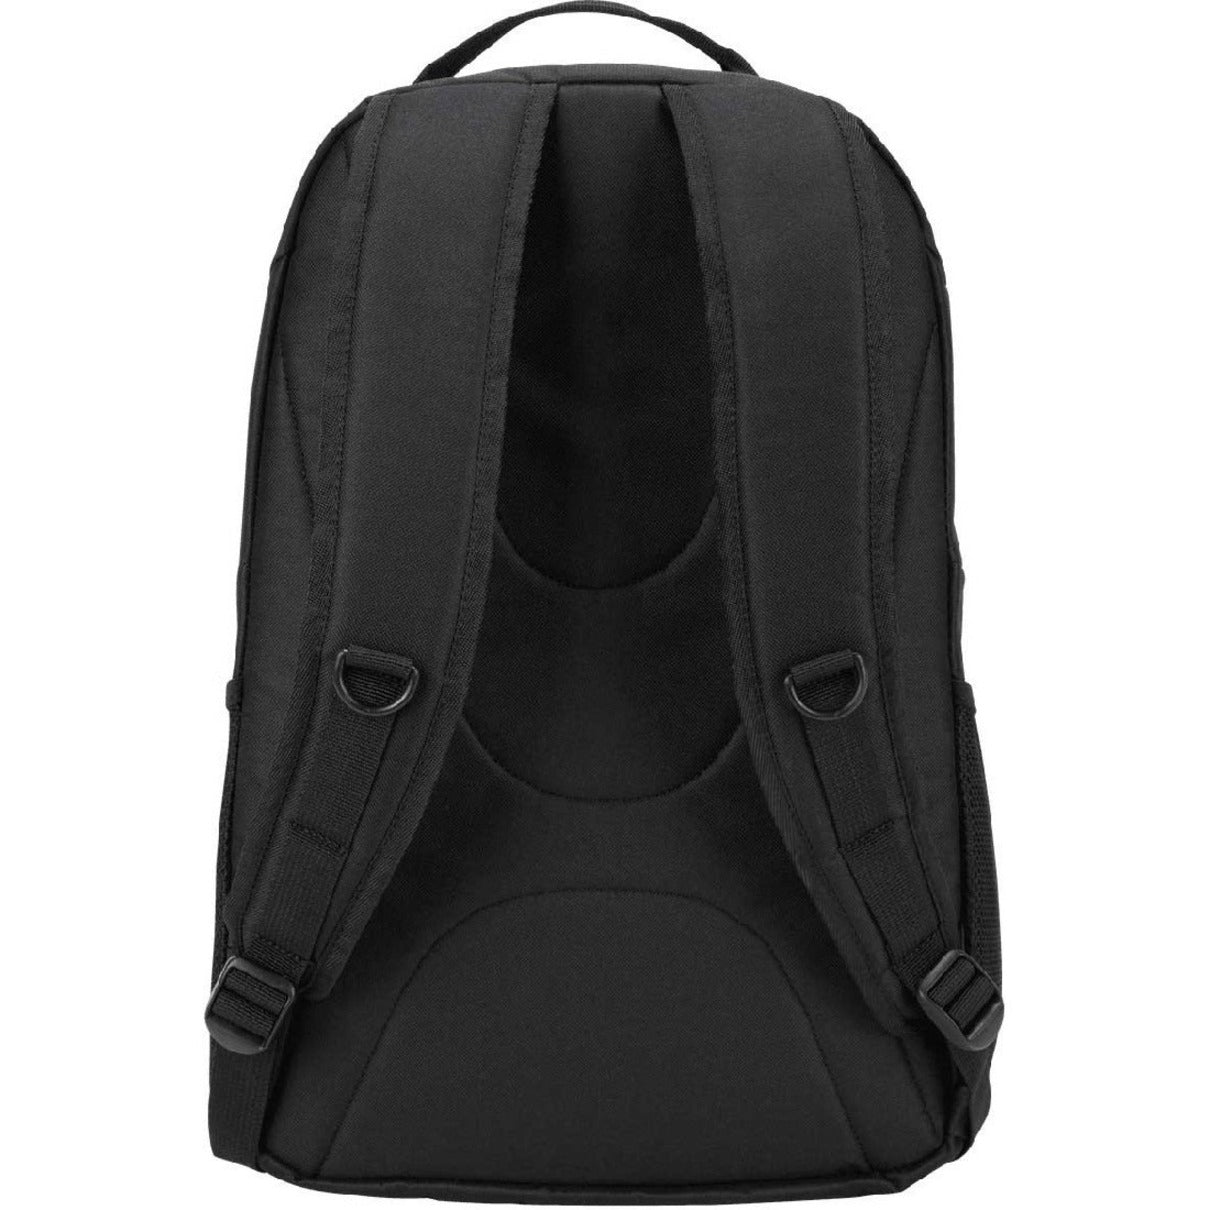 Targus TSB194US 16" Motor Laptop Backpack, Lockable Notebook Compartment, Water Resistant Exterior